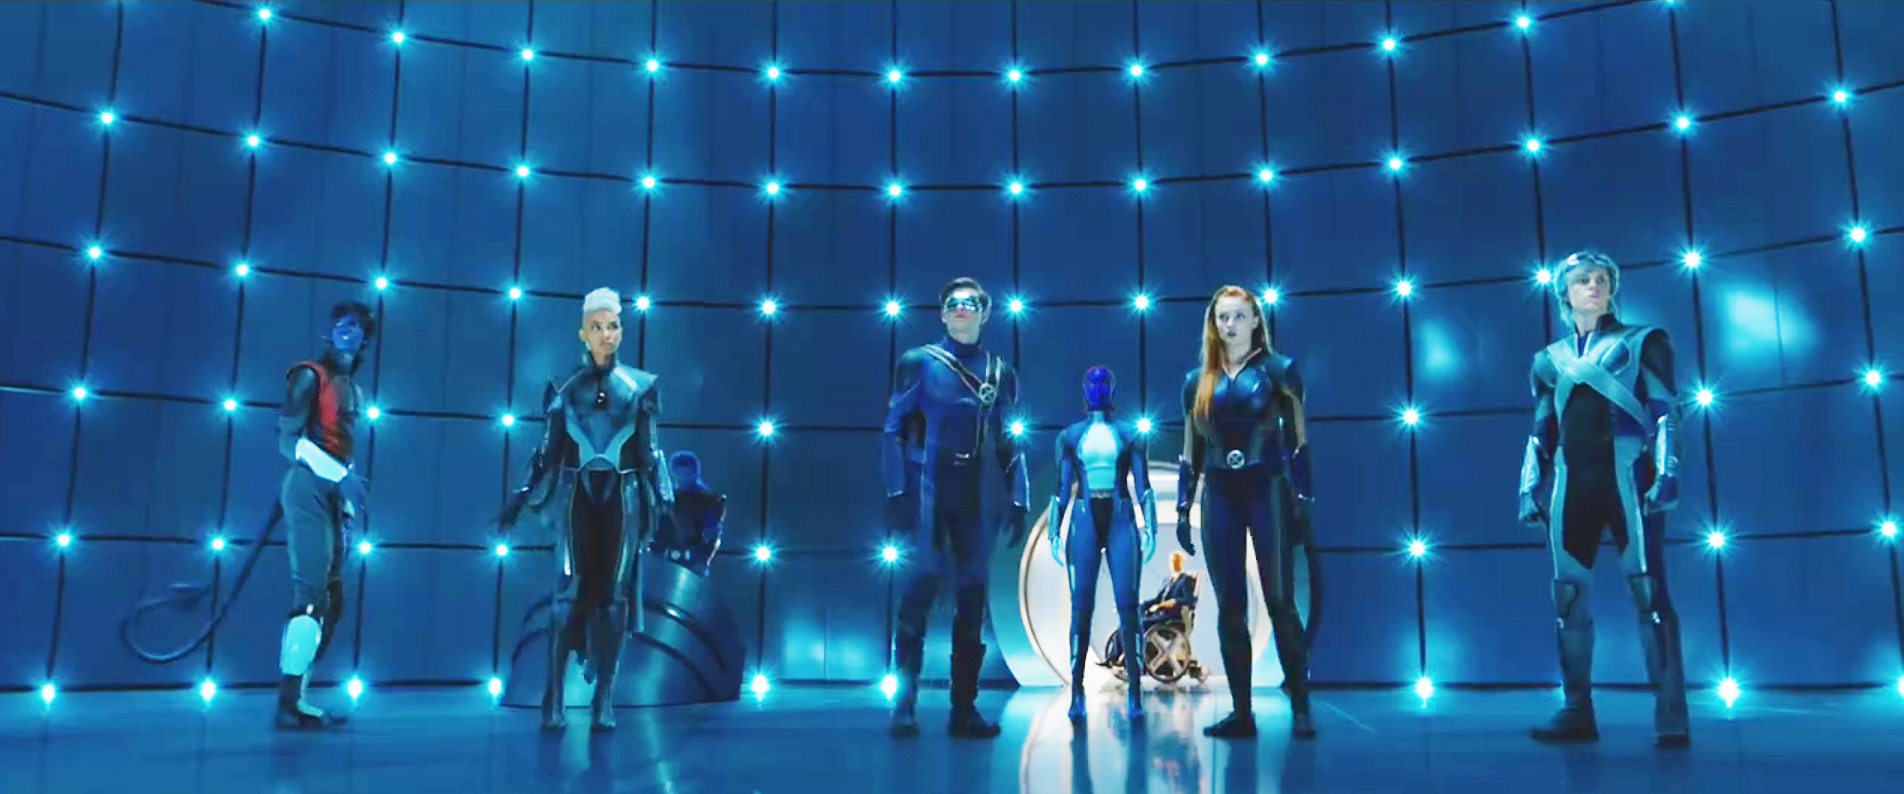 Check Out X-Men Apocalypse’s Comic-Inspired Uniforms In All Their Goofy Glory